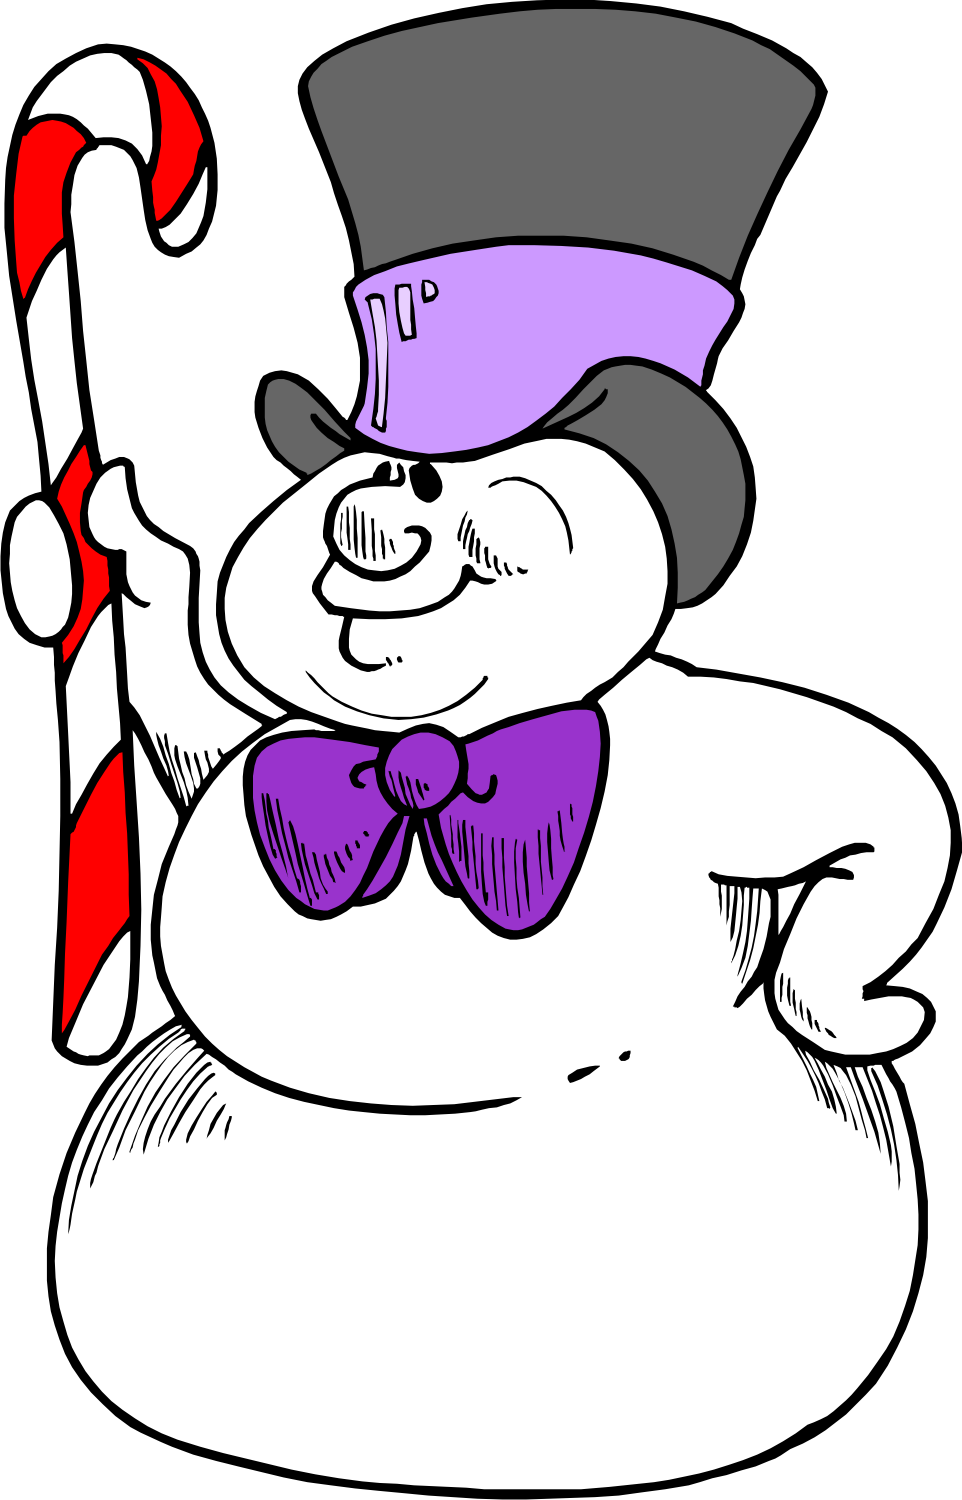 Frosty The Snowman Clip Art - Clipart library